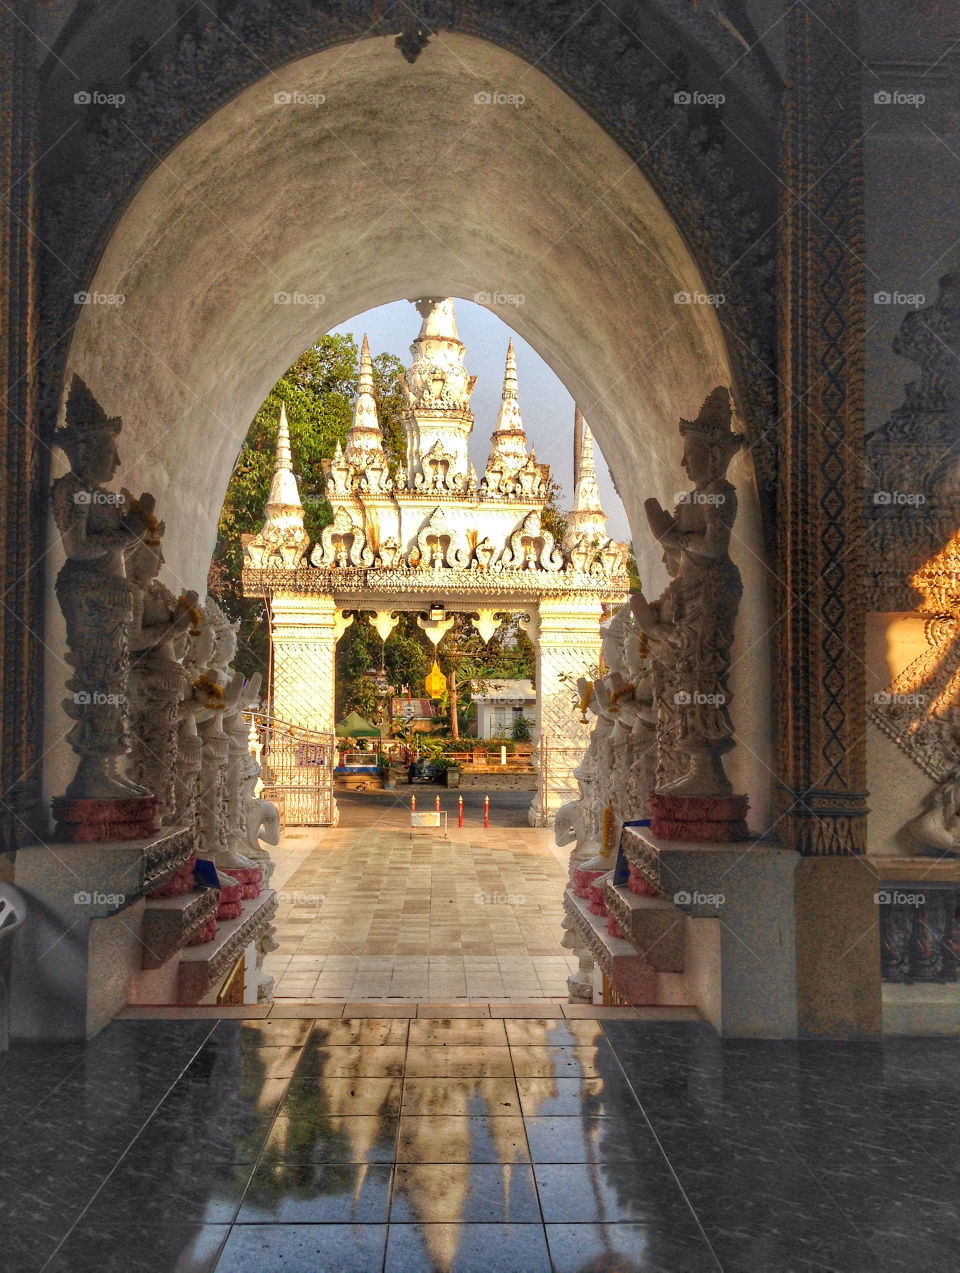 Destination Thailand,The tranquil temple in Lamphun province.